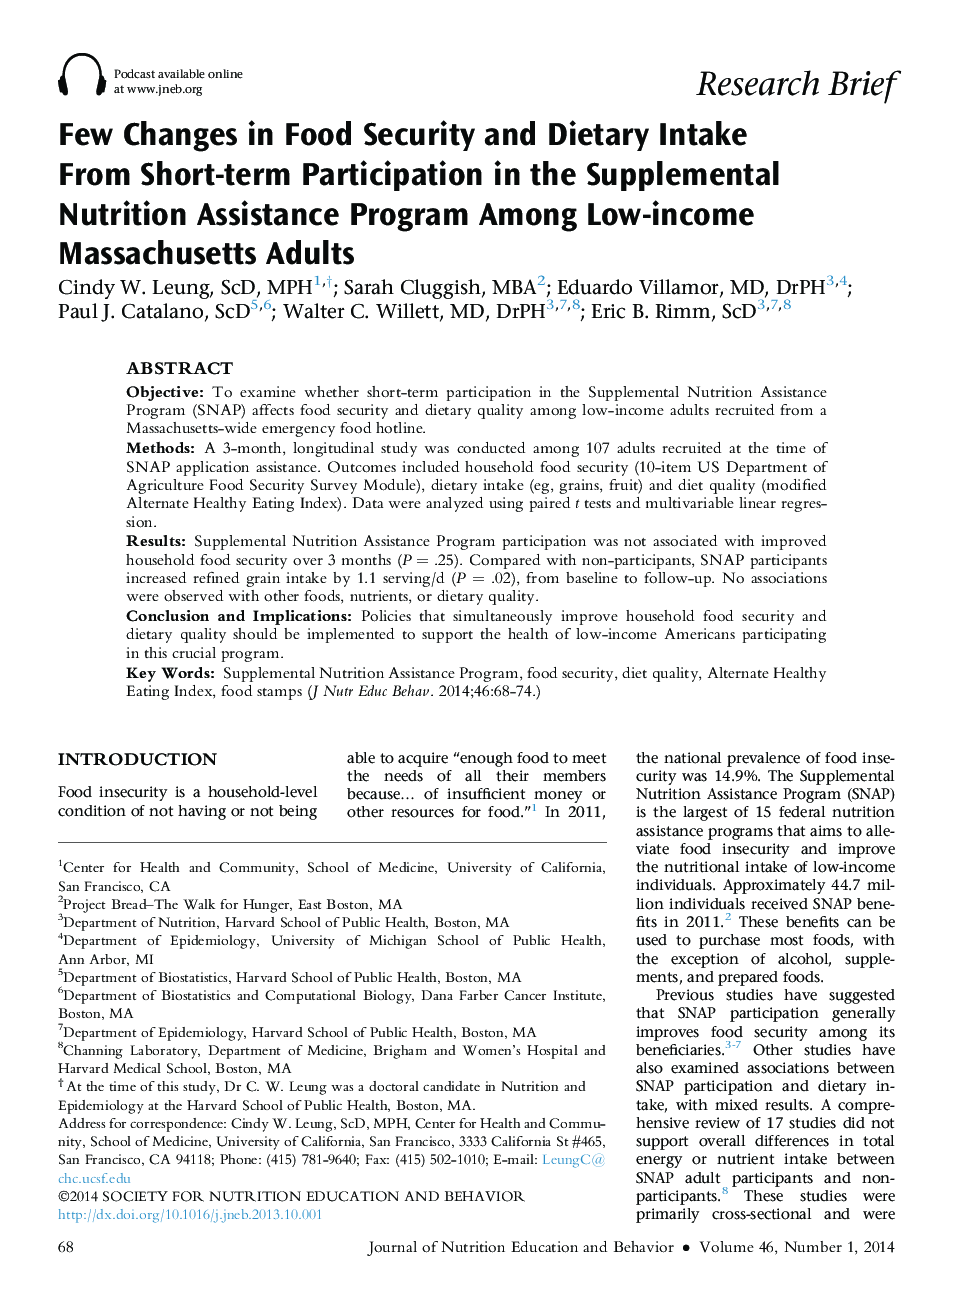 Few Changes in Food Security and Dietary Intake From Short-term Participation in the Supplemental Nutrition Assistance Program Among Low-income Massachusetts Adults